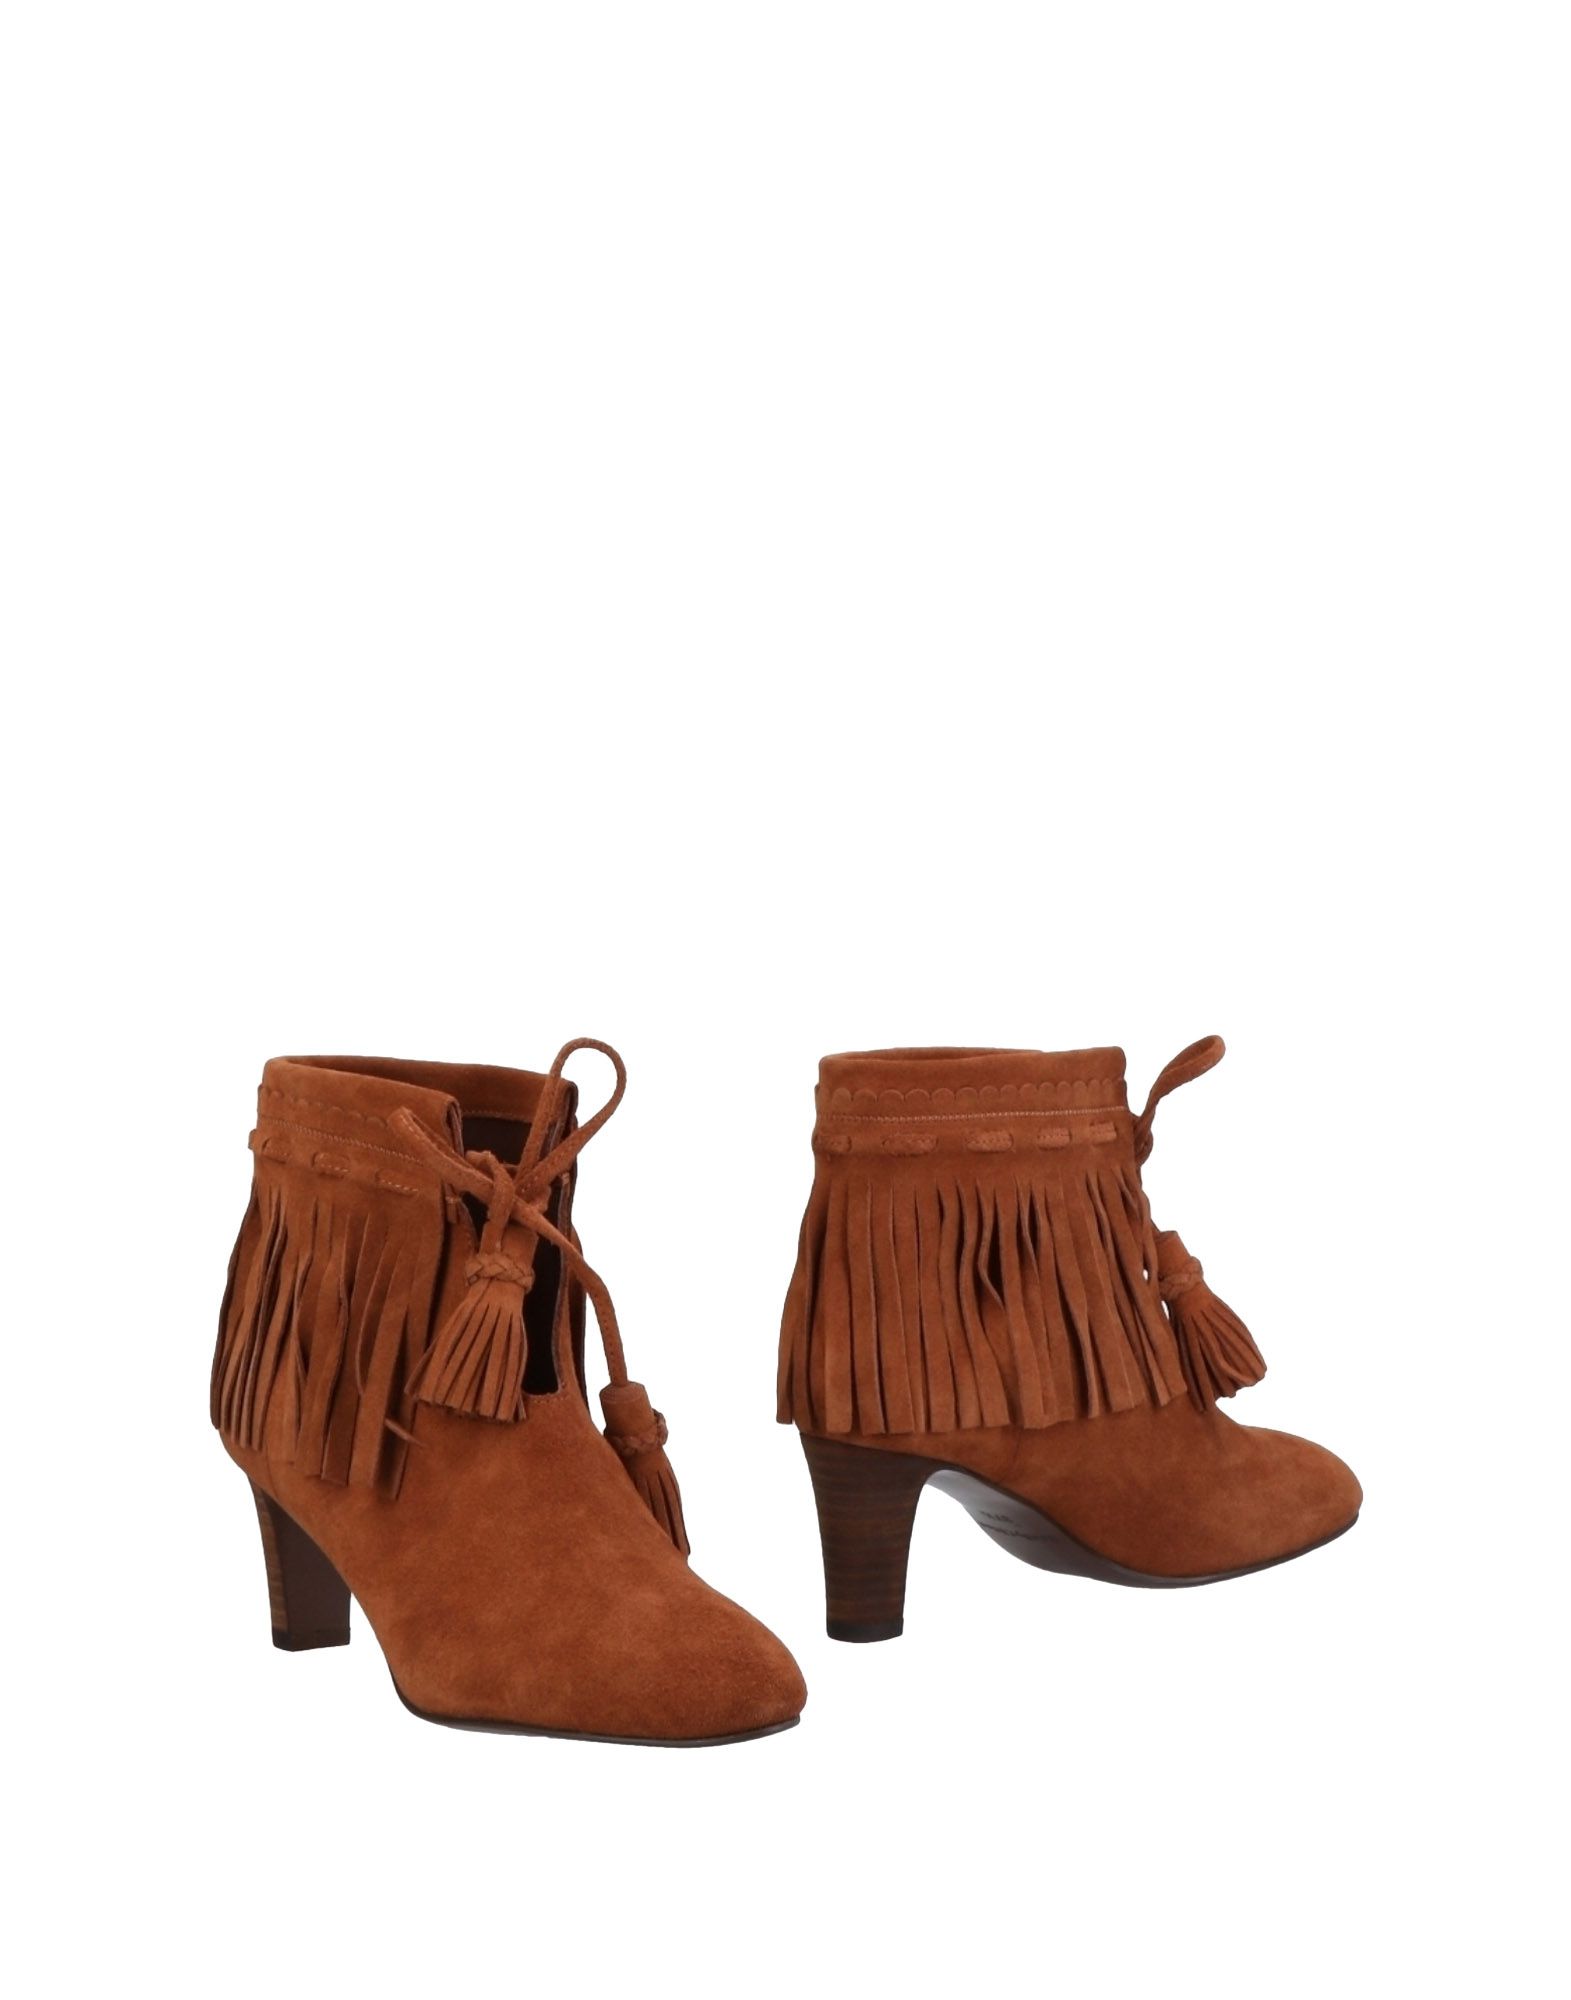 SEE BY CHLOÉ SEE BY CHLOÉ WOMAN ANKLE BOOTS CAMEL SIZE 6 SOFT LEATHER,11463135BE 8